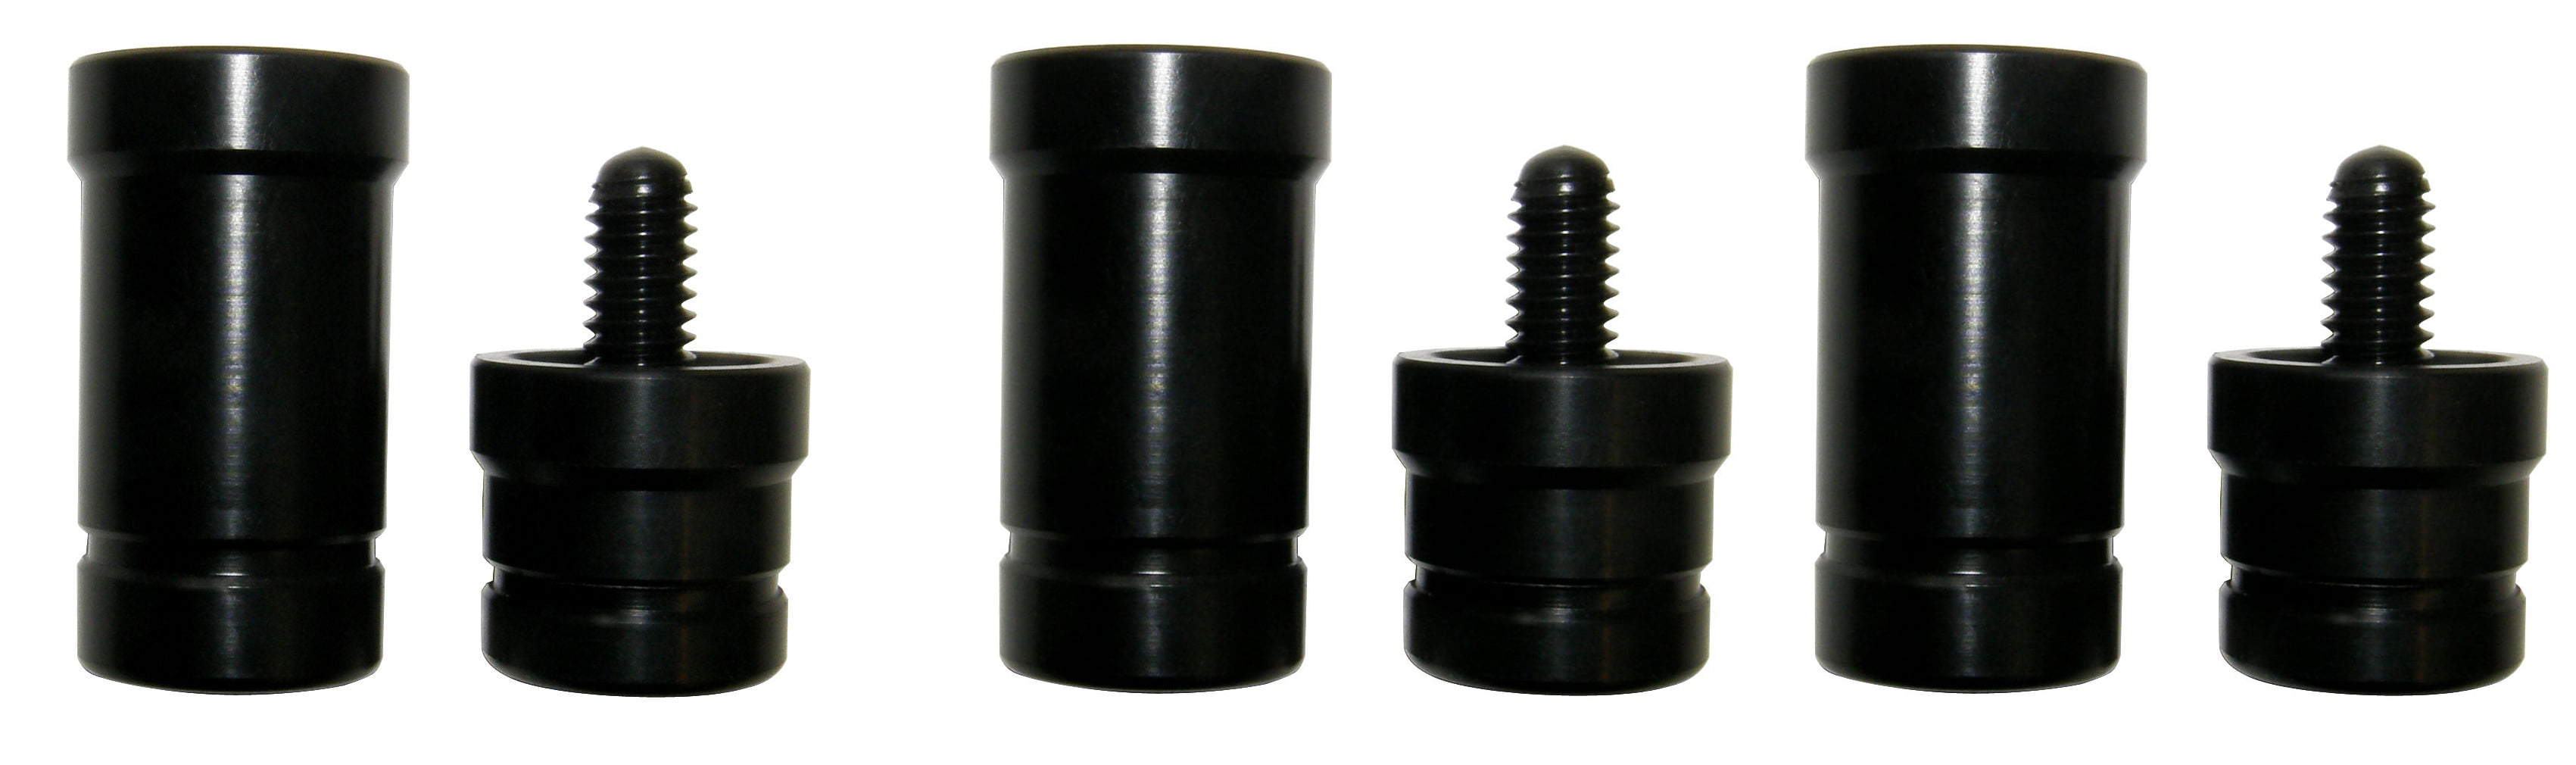 TNT 4 Inch Black Mid Extension for your pool cue 5/16-18 Joint. 